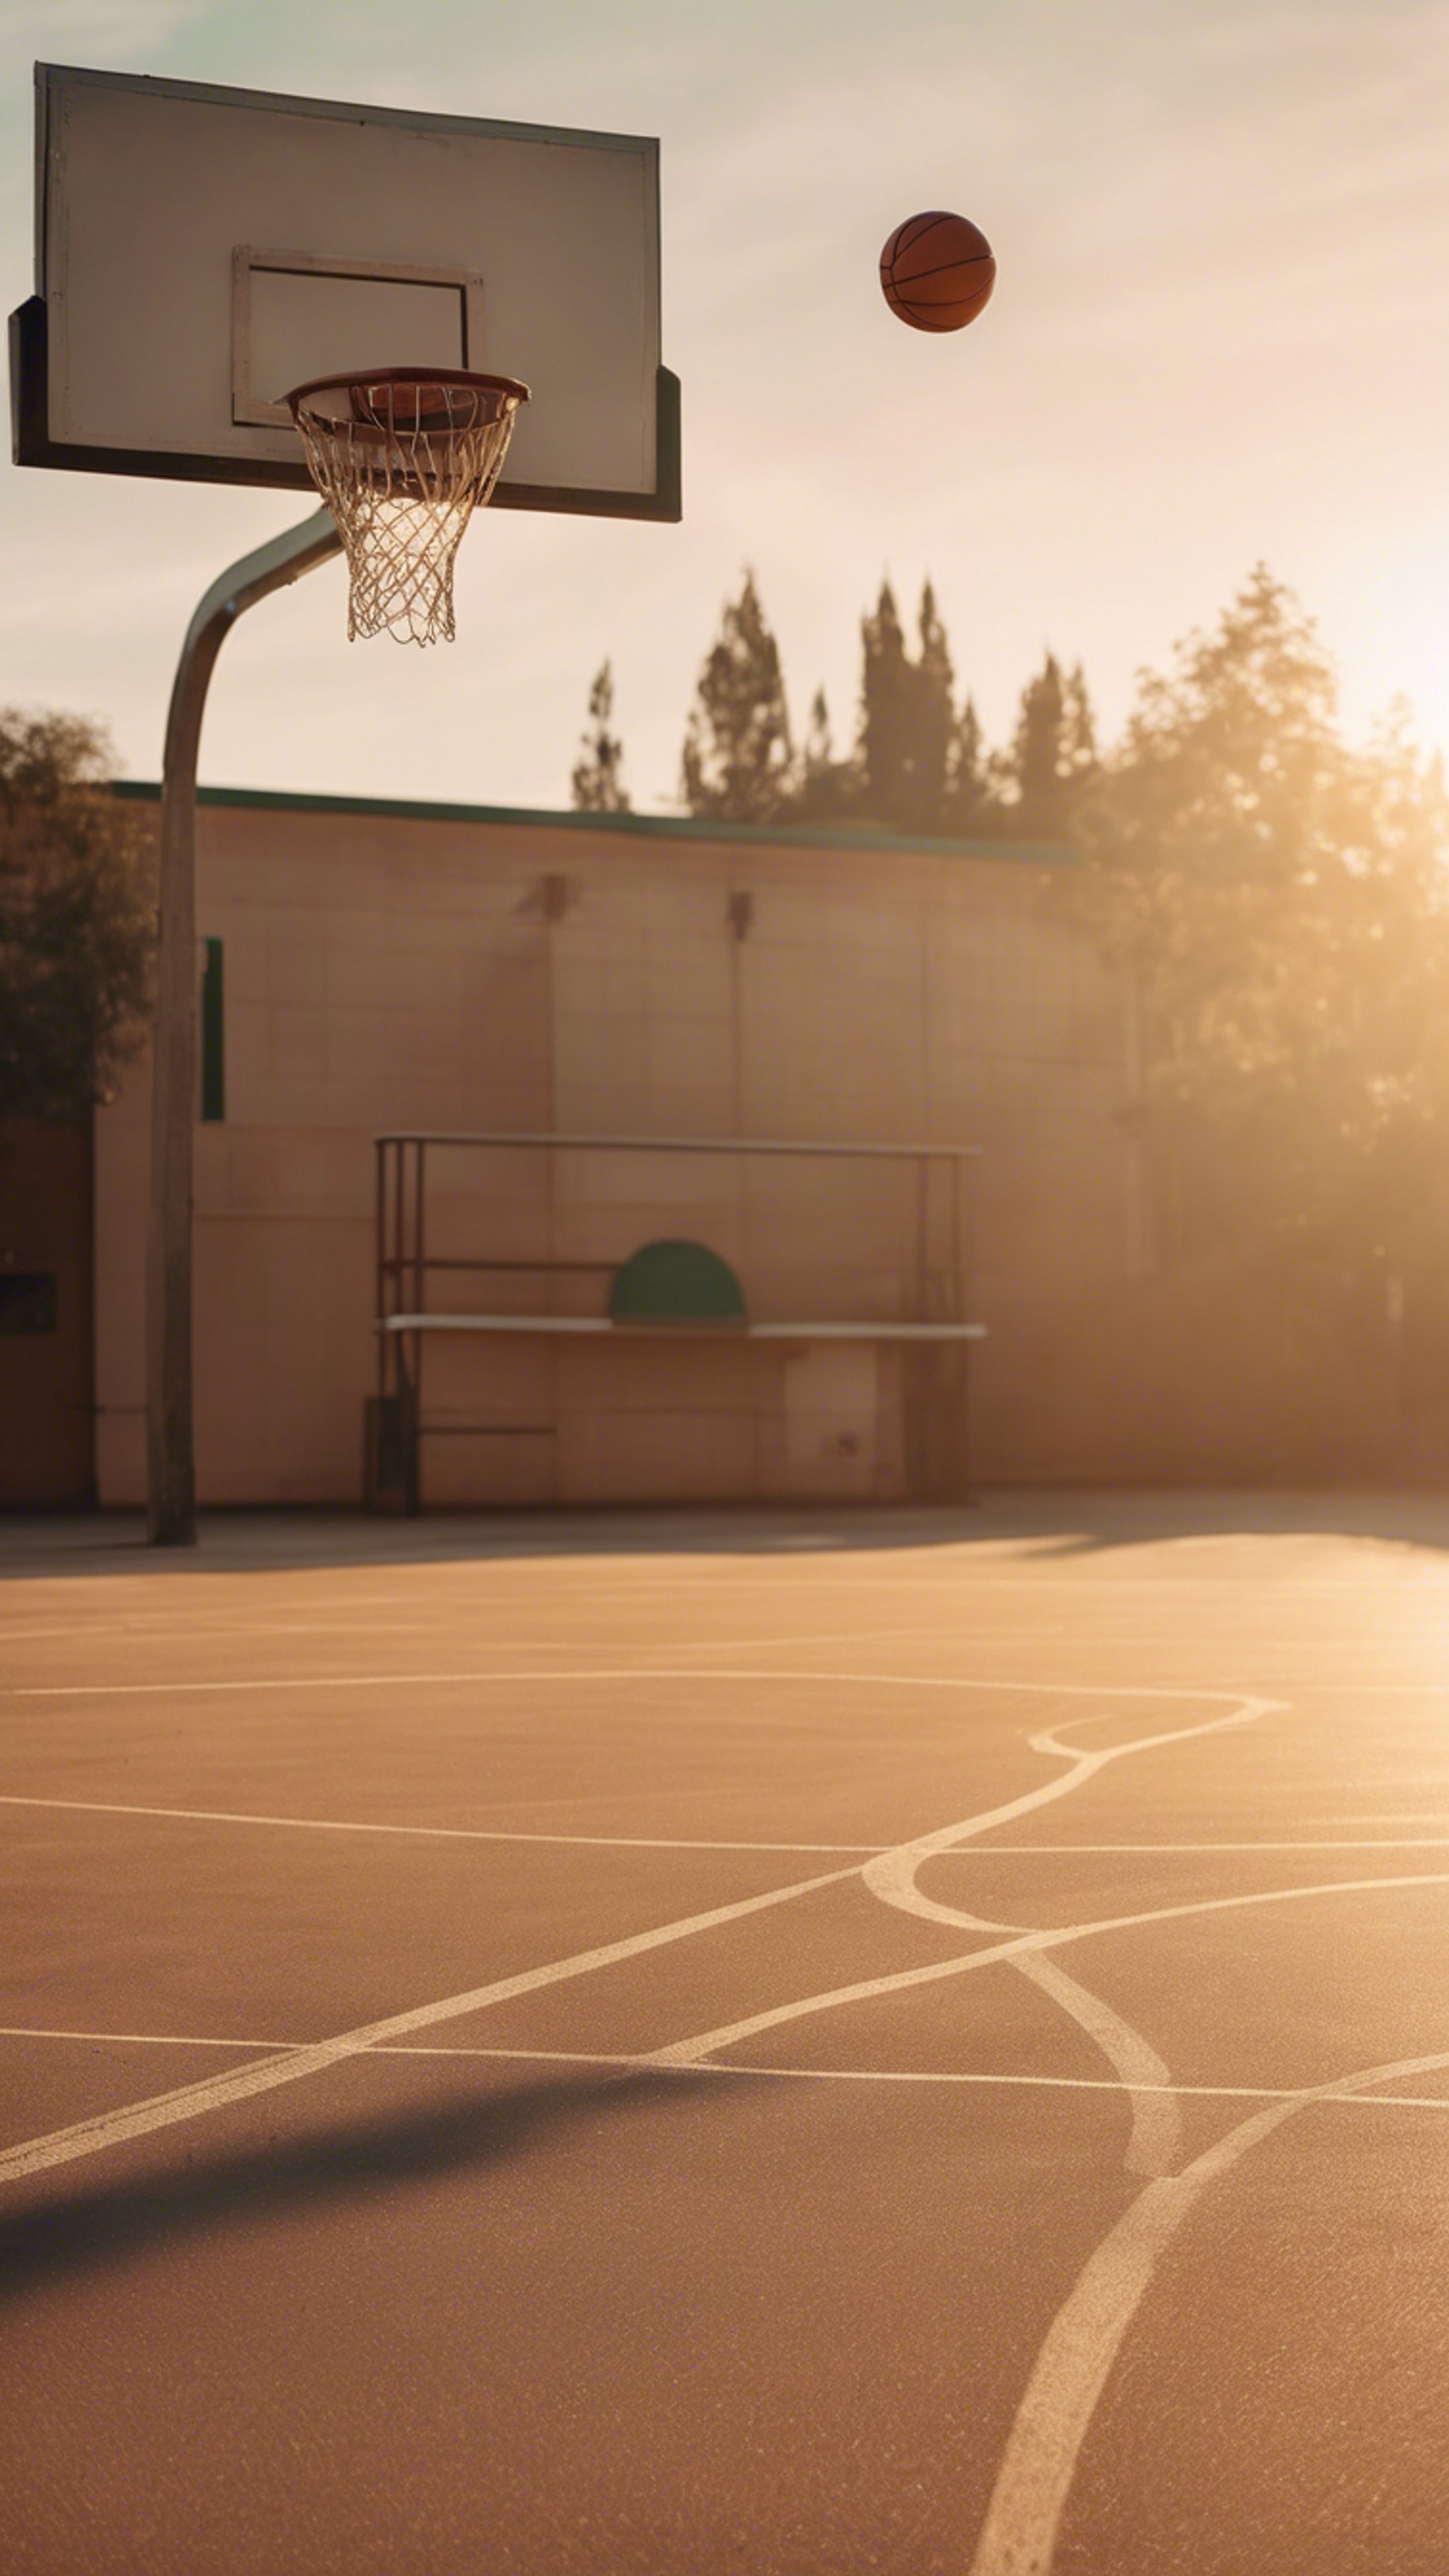 A deserted school’s basketball court in the pacific golden light of sunset. Tapetai[5d35315ab9de41dcbc38]